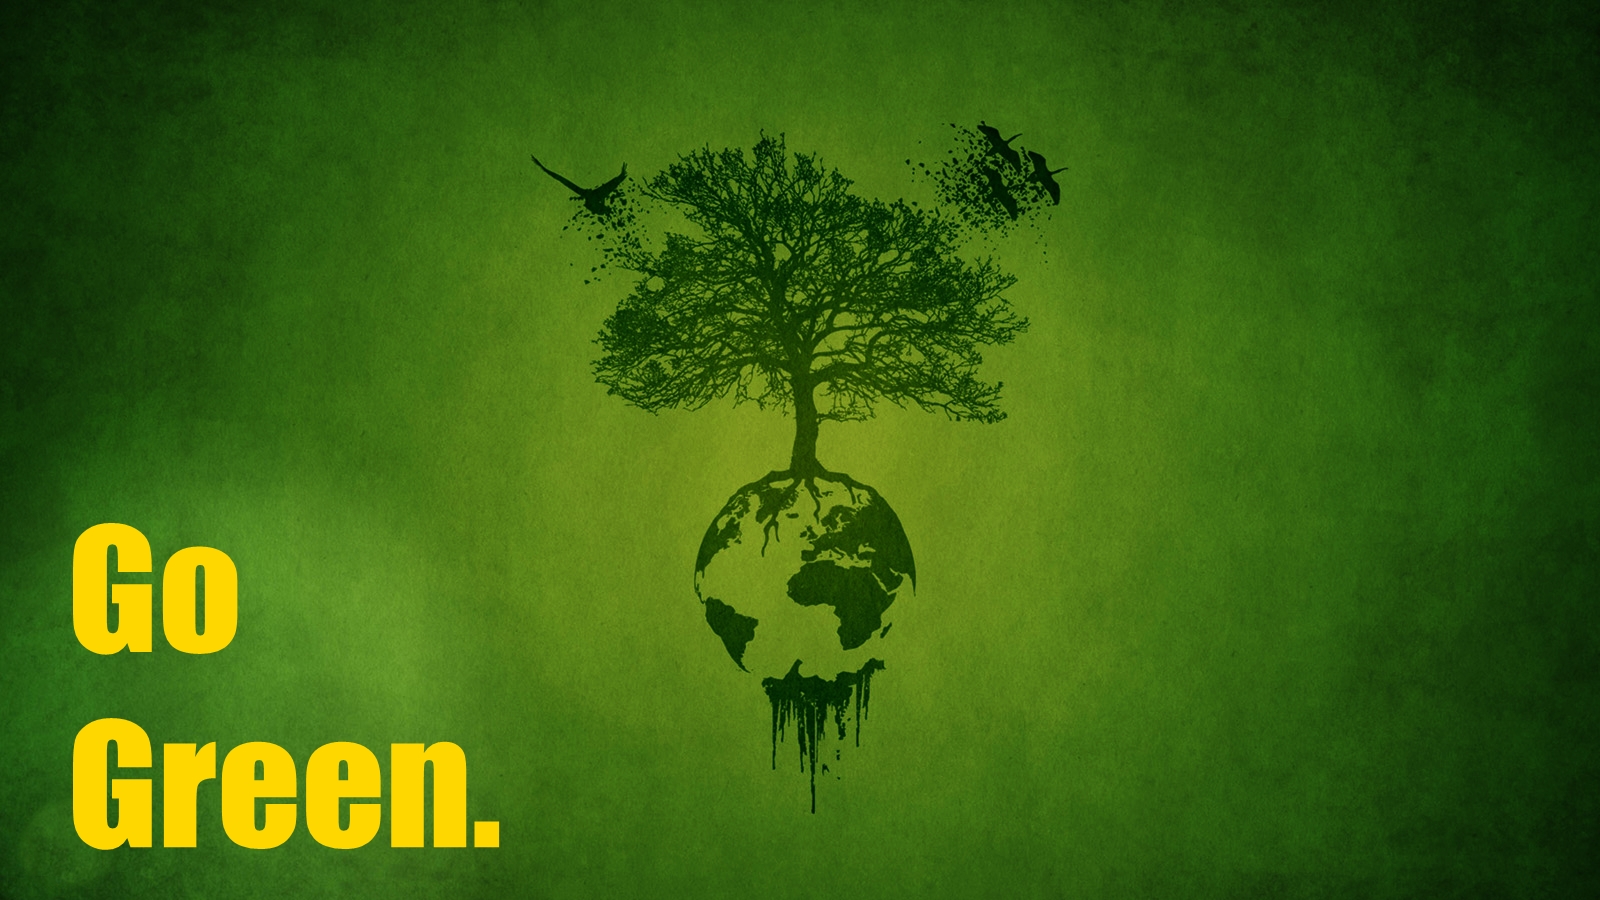 greenpeace wallpaper,green,nature,tree,text,arbor day